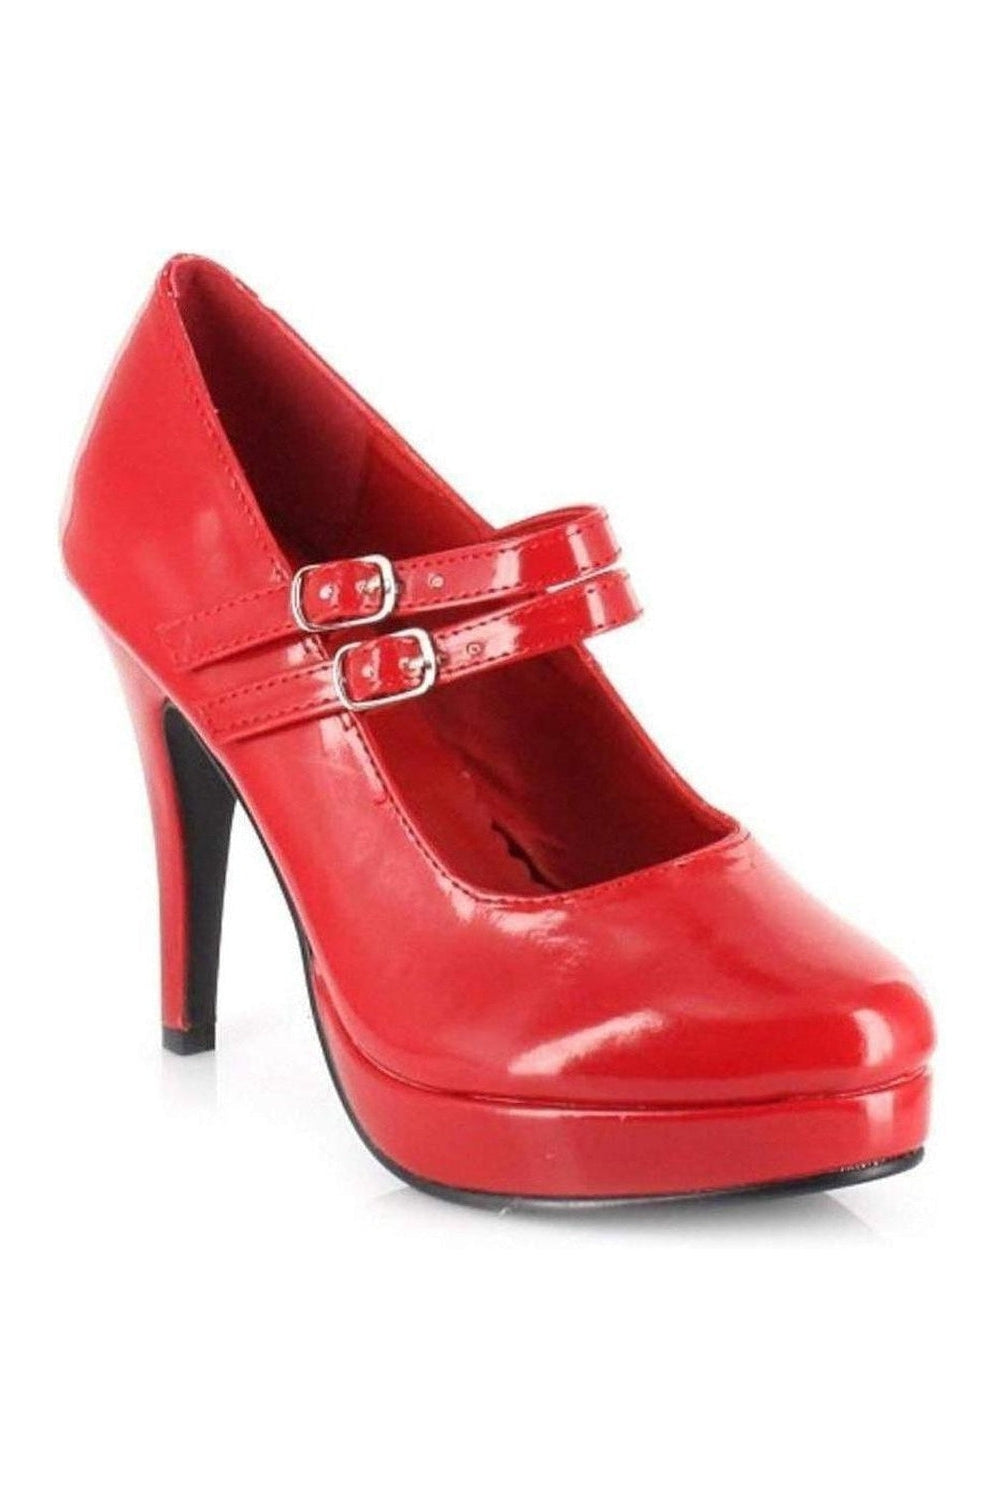 421-JANE Mary Jane | Red Patent-Ellie Shoes-Red-Mary Janes-SEXYSHOES.COM